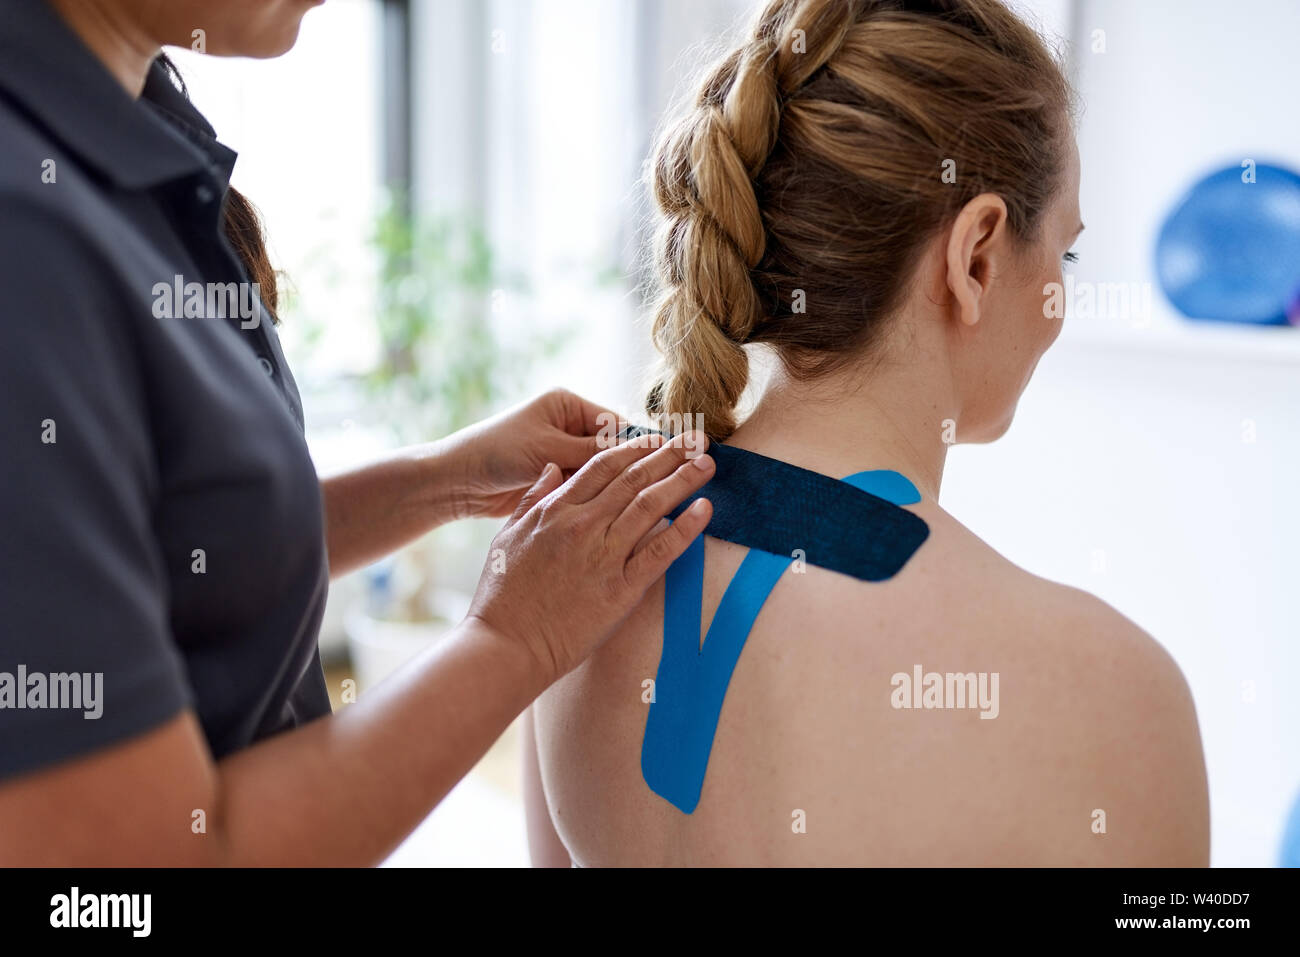 https://c8.alamy.com/comp/W40DD7/chinese-woman-massage-therapist-applying-kinesio-tape-to-the-shoulders-and-neck-of-an-attractive-blond-client-in-a-bright-medical-office-W40DD7.jpg